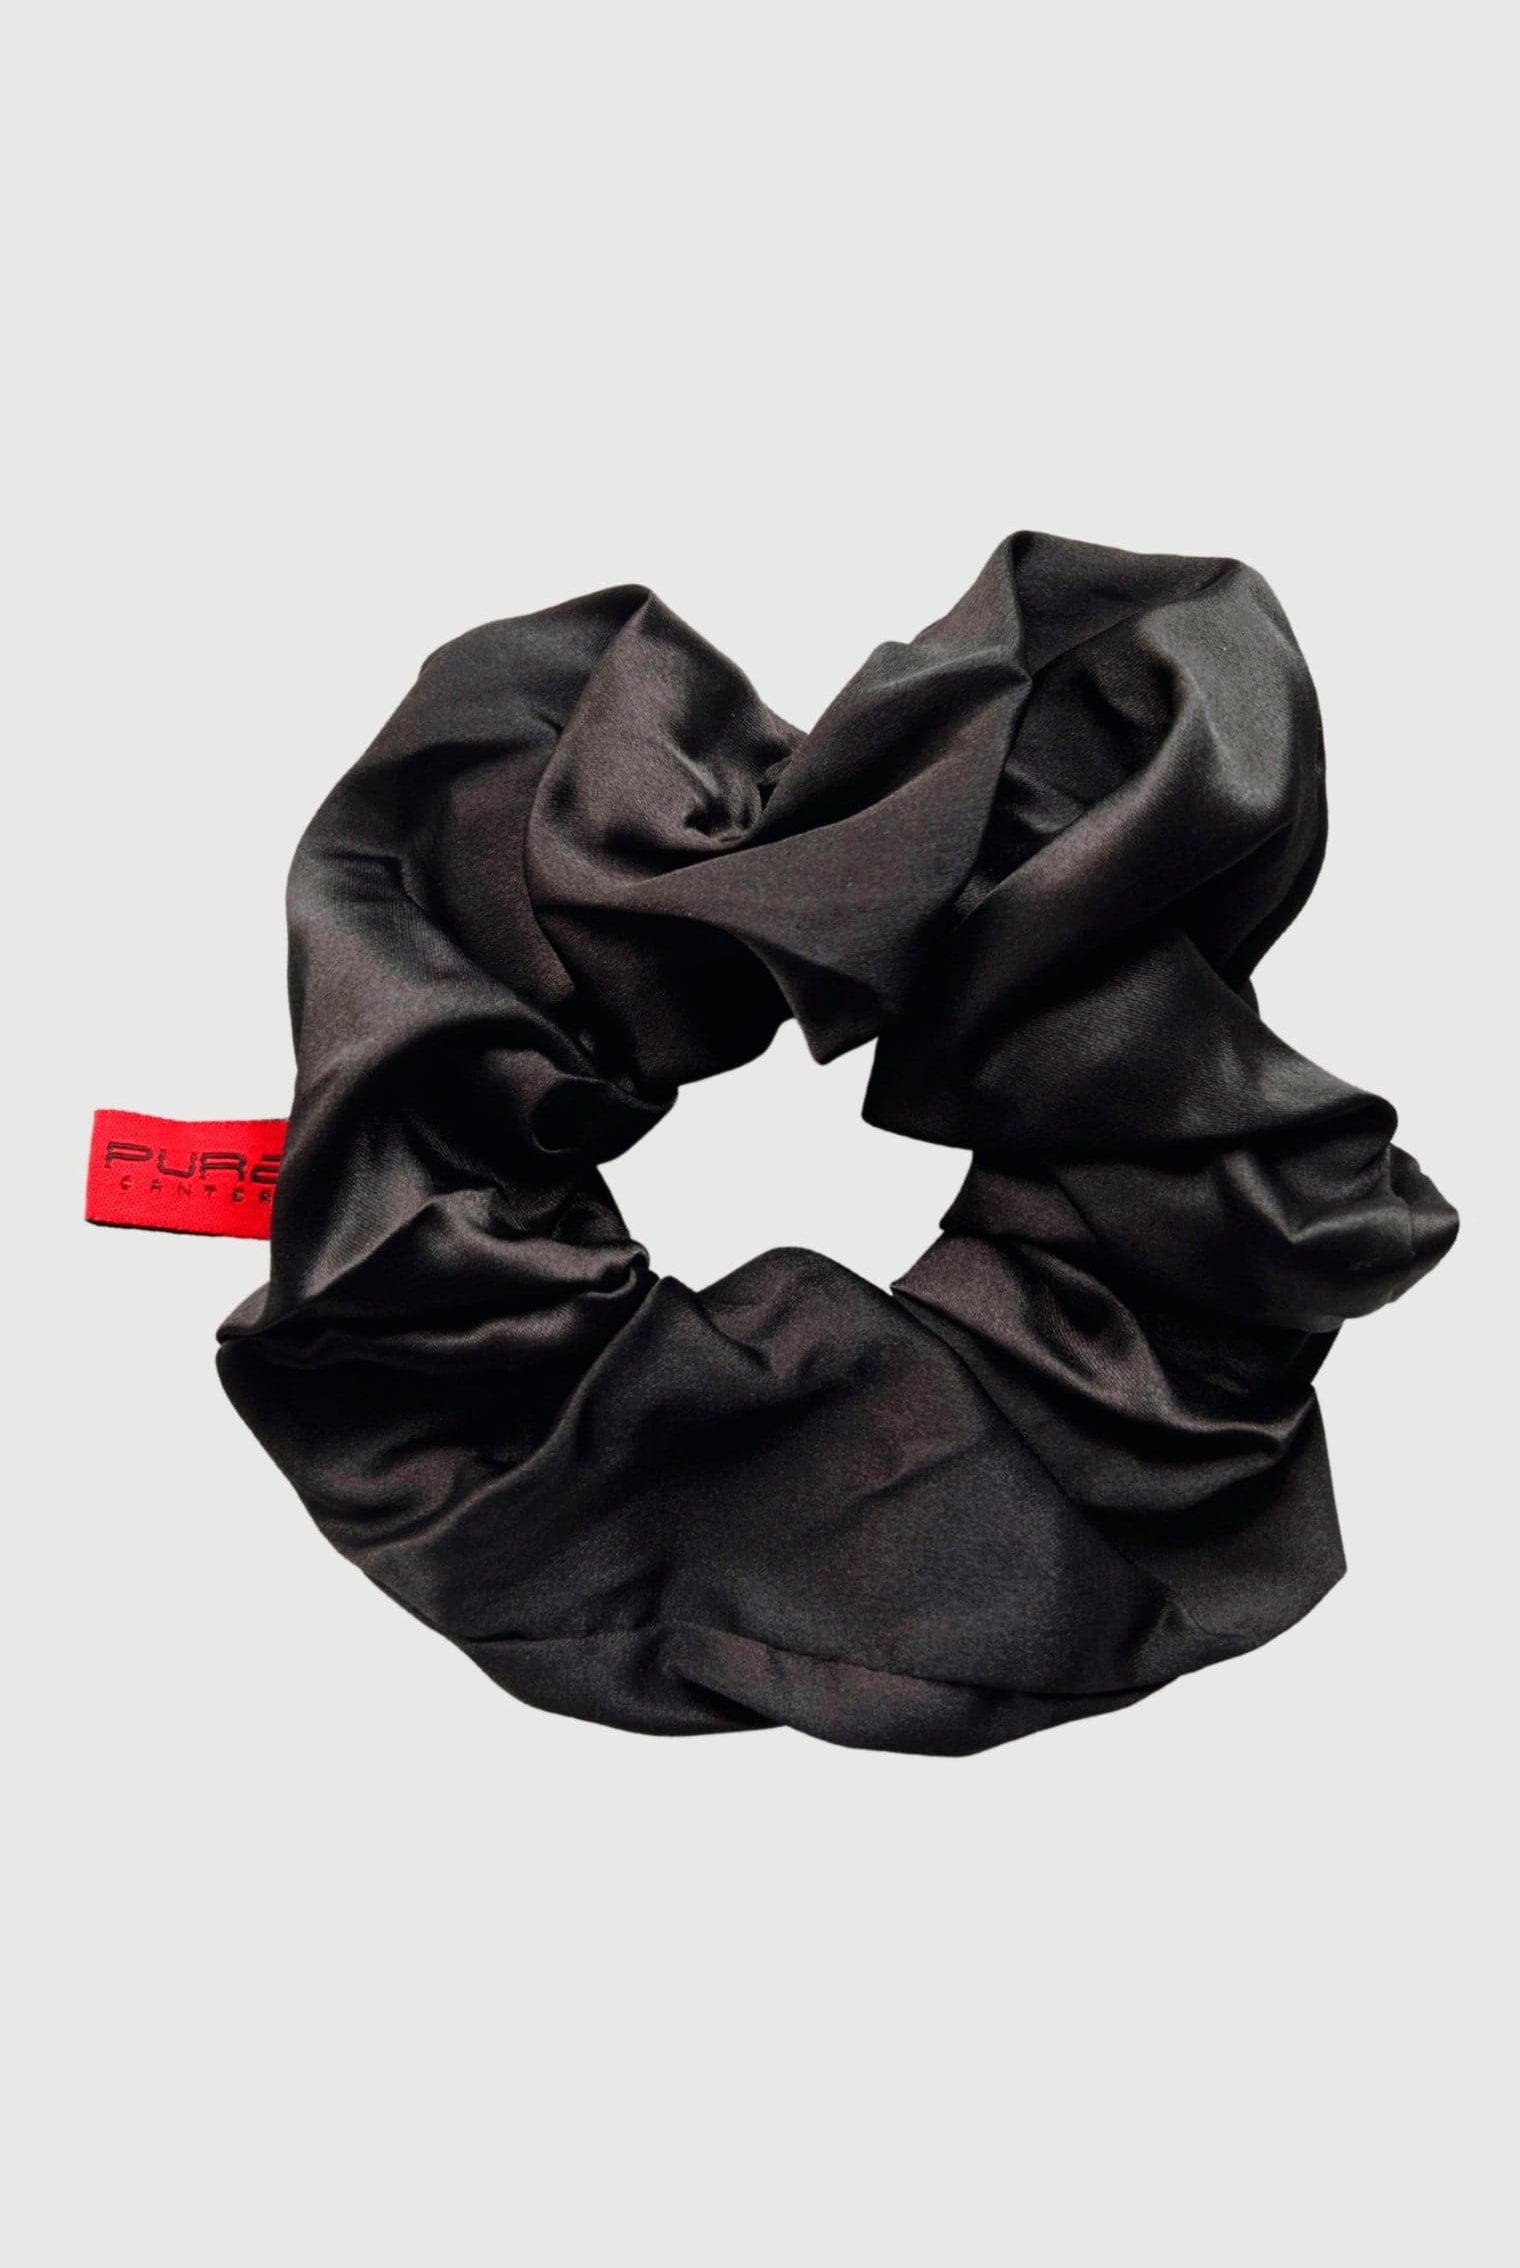 A beautiful Oversized Scrunchie made of shiny black fabric with a subtle gathered texture. Attached to it is a small red label with text that reads "PURE." Perfect for casual outings, the background is plain grey. This exquisite accessory is brought to you by Pure Canter Pty Ltd.